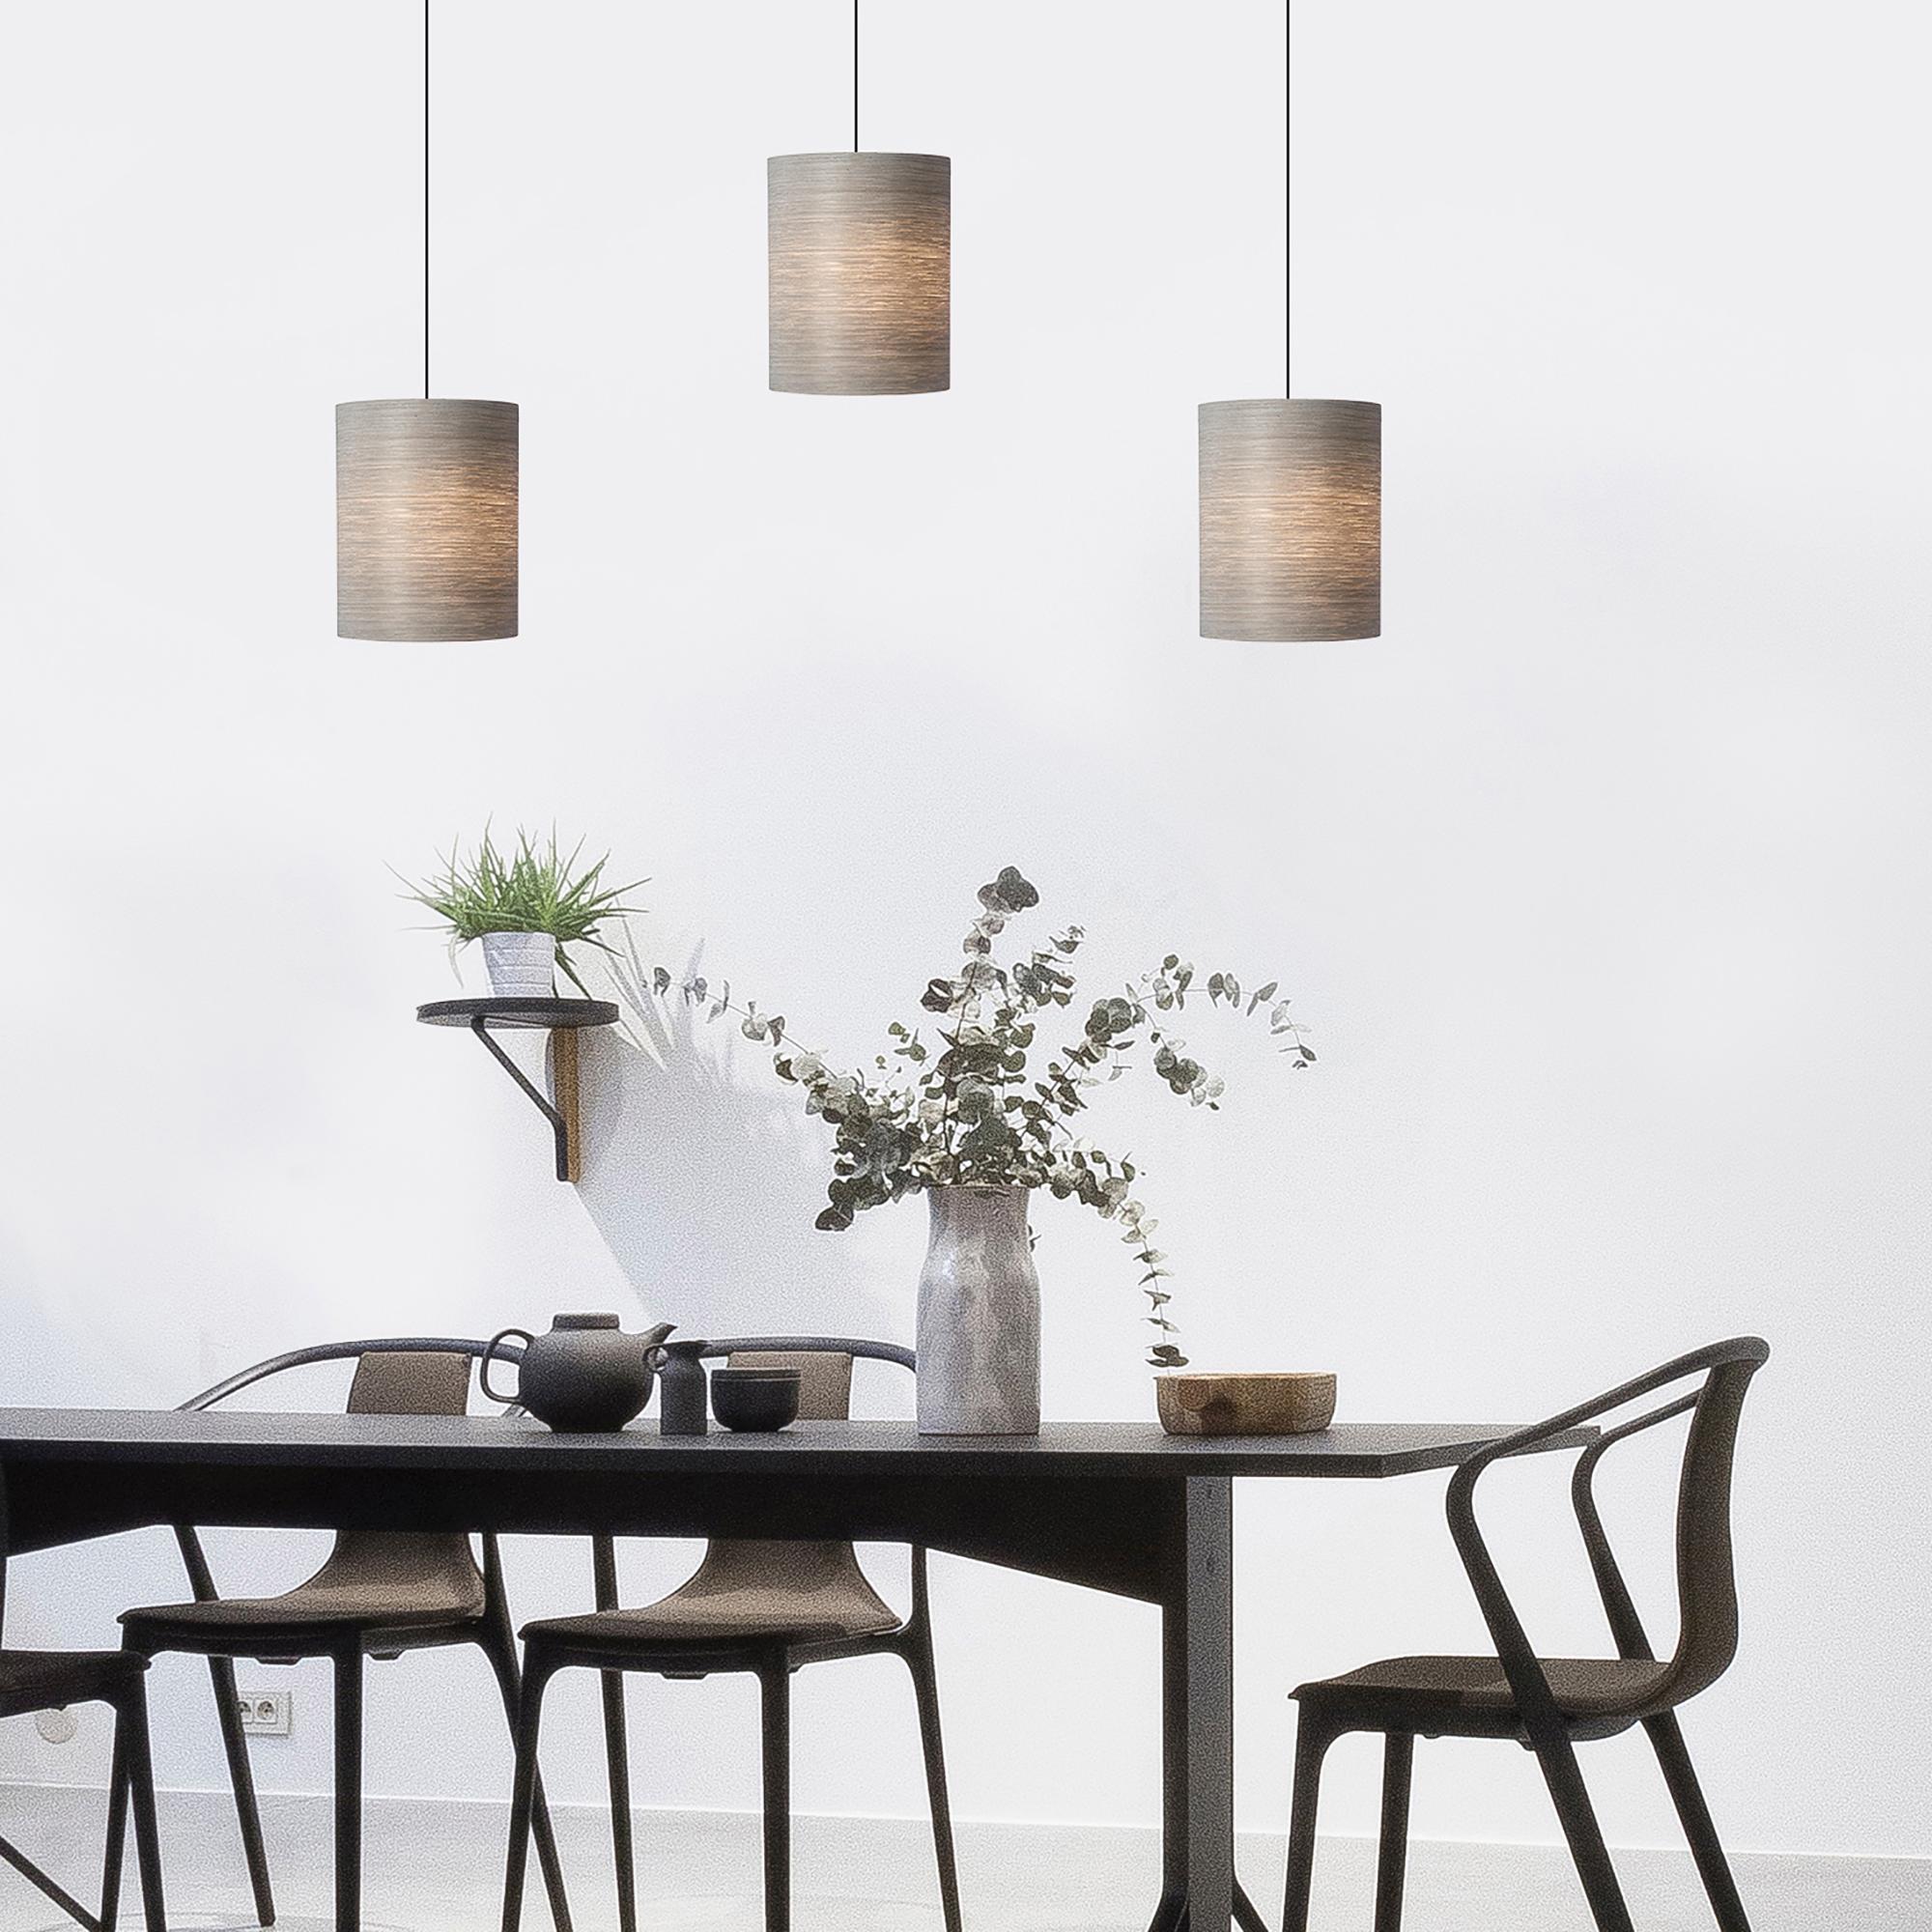 Centa is a contemporary, Mid-Century Modern light fixture. This is a minimalist luxury pendant design and can be exhibited in dining rooms, entryways, alcoves, and over kitchen islands. Gray Tay is harvested from the African Koto tree. The